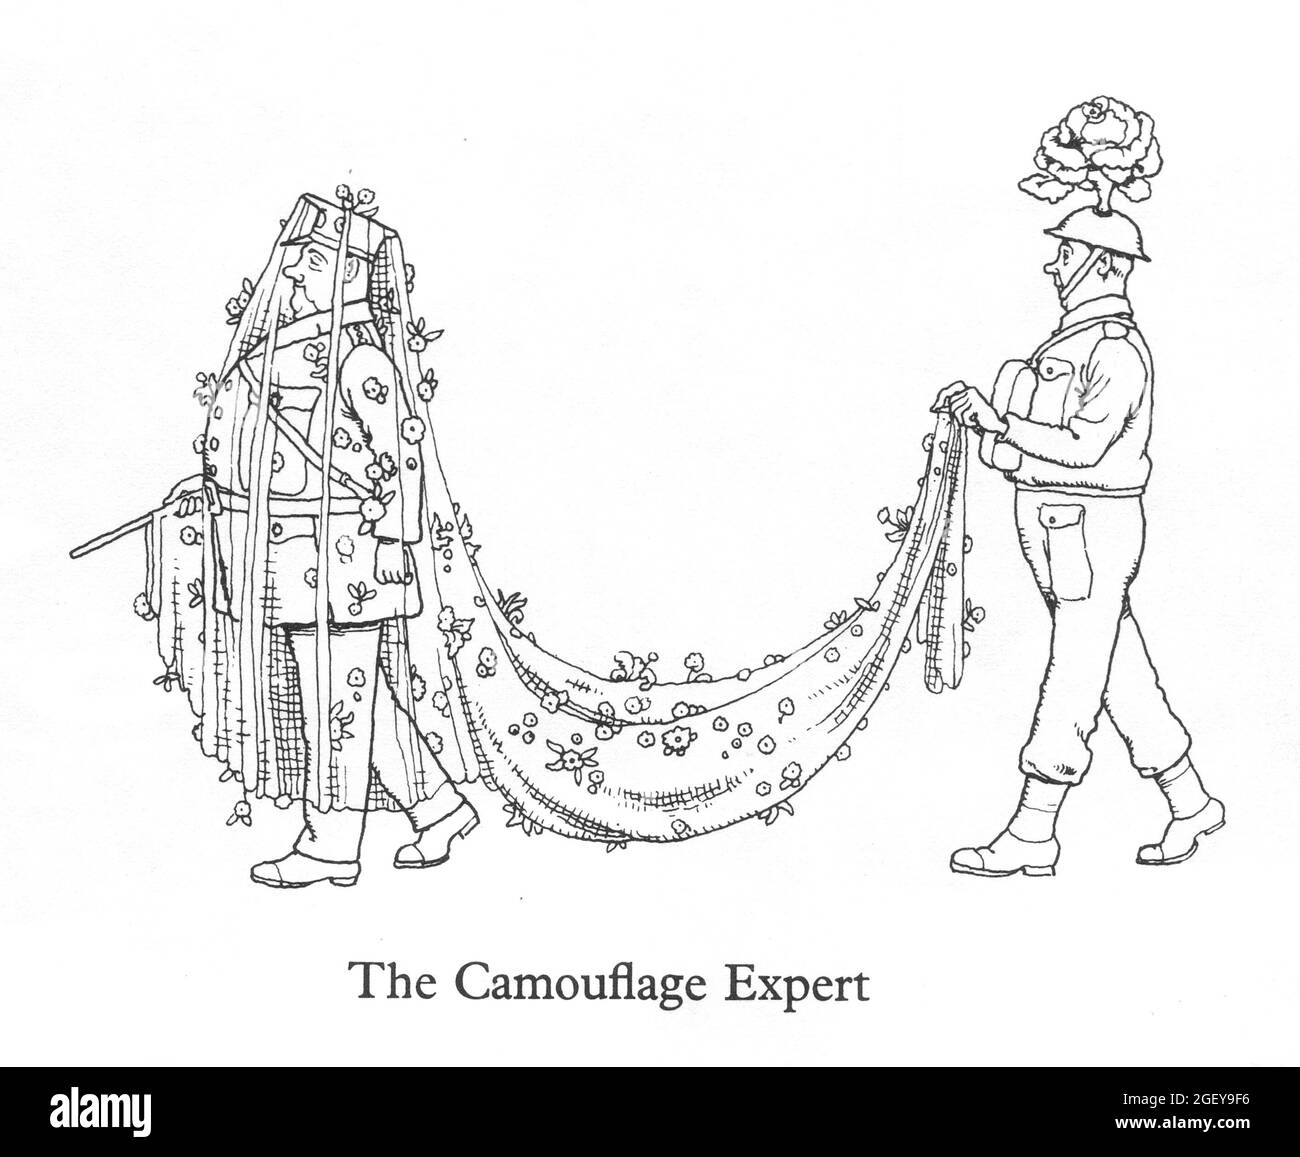 Page from William Heath Robinson (1872-1944) Inventions: The Camouflage Expert Stock Photo